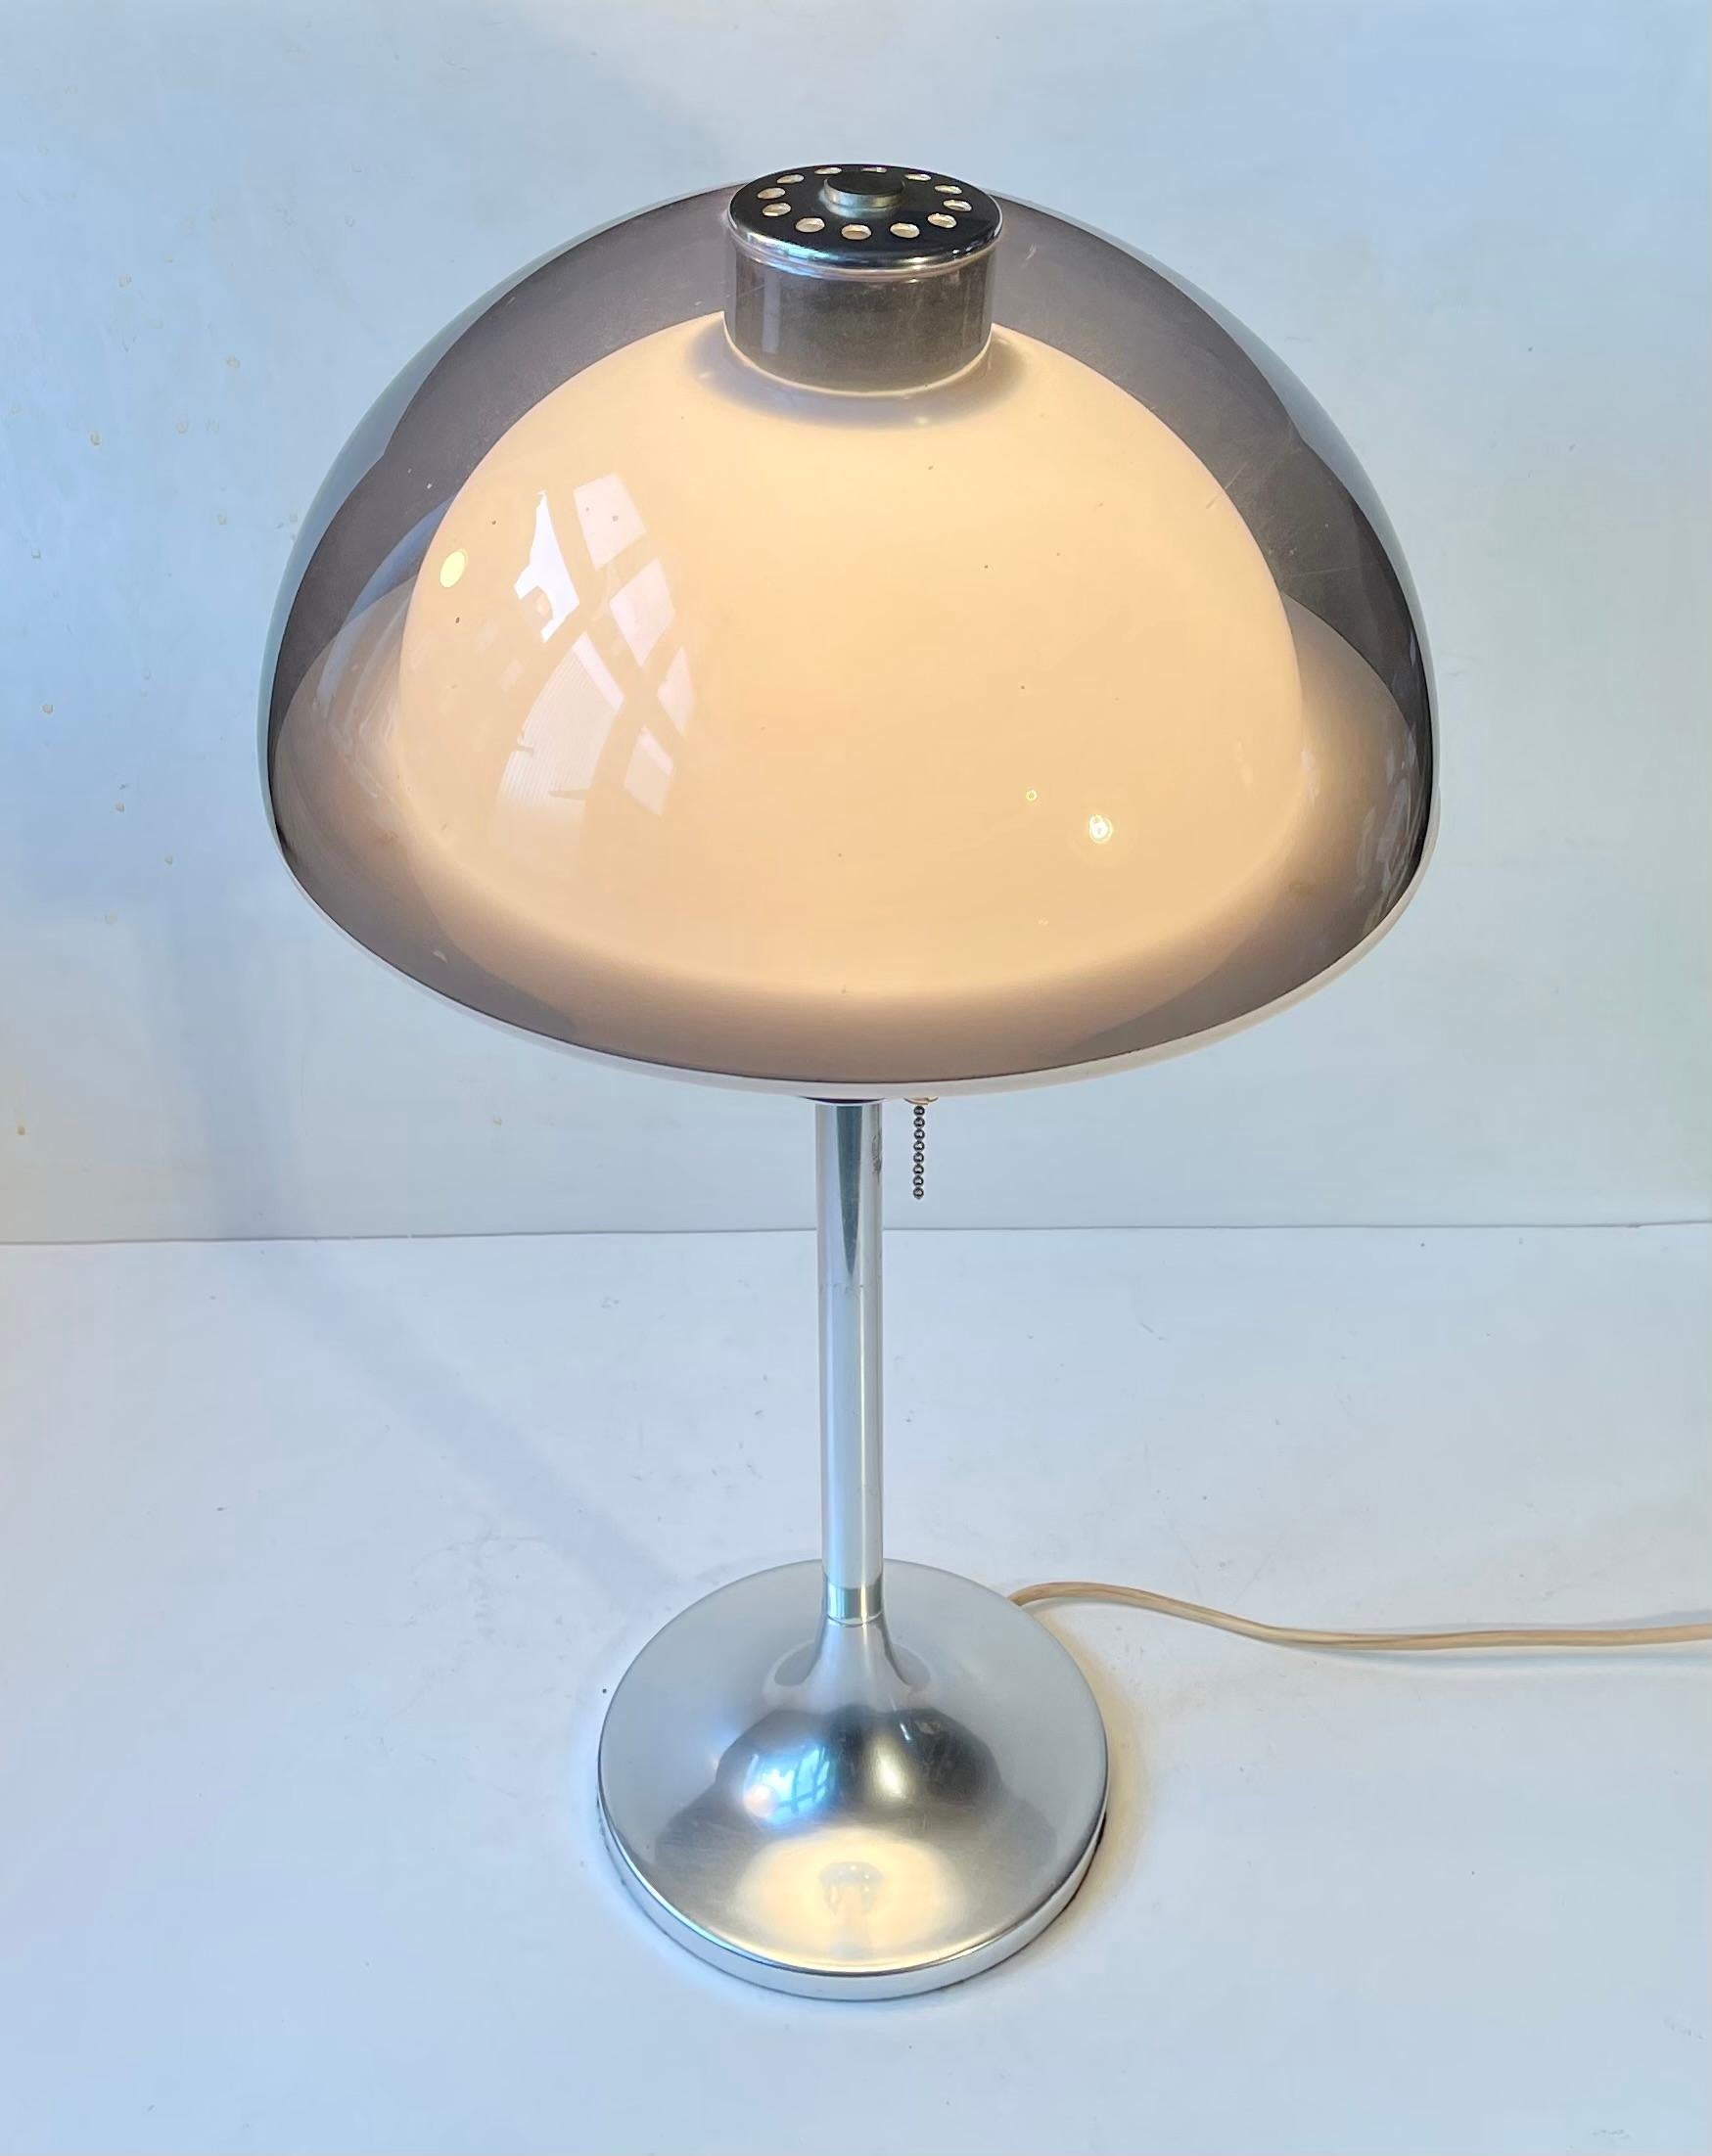 Vintage Tulip Table Lamp by Robert Welch for Lumitron, 1970s For Sale 1